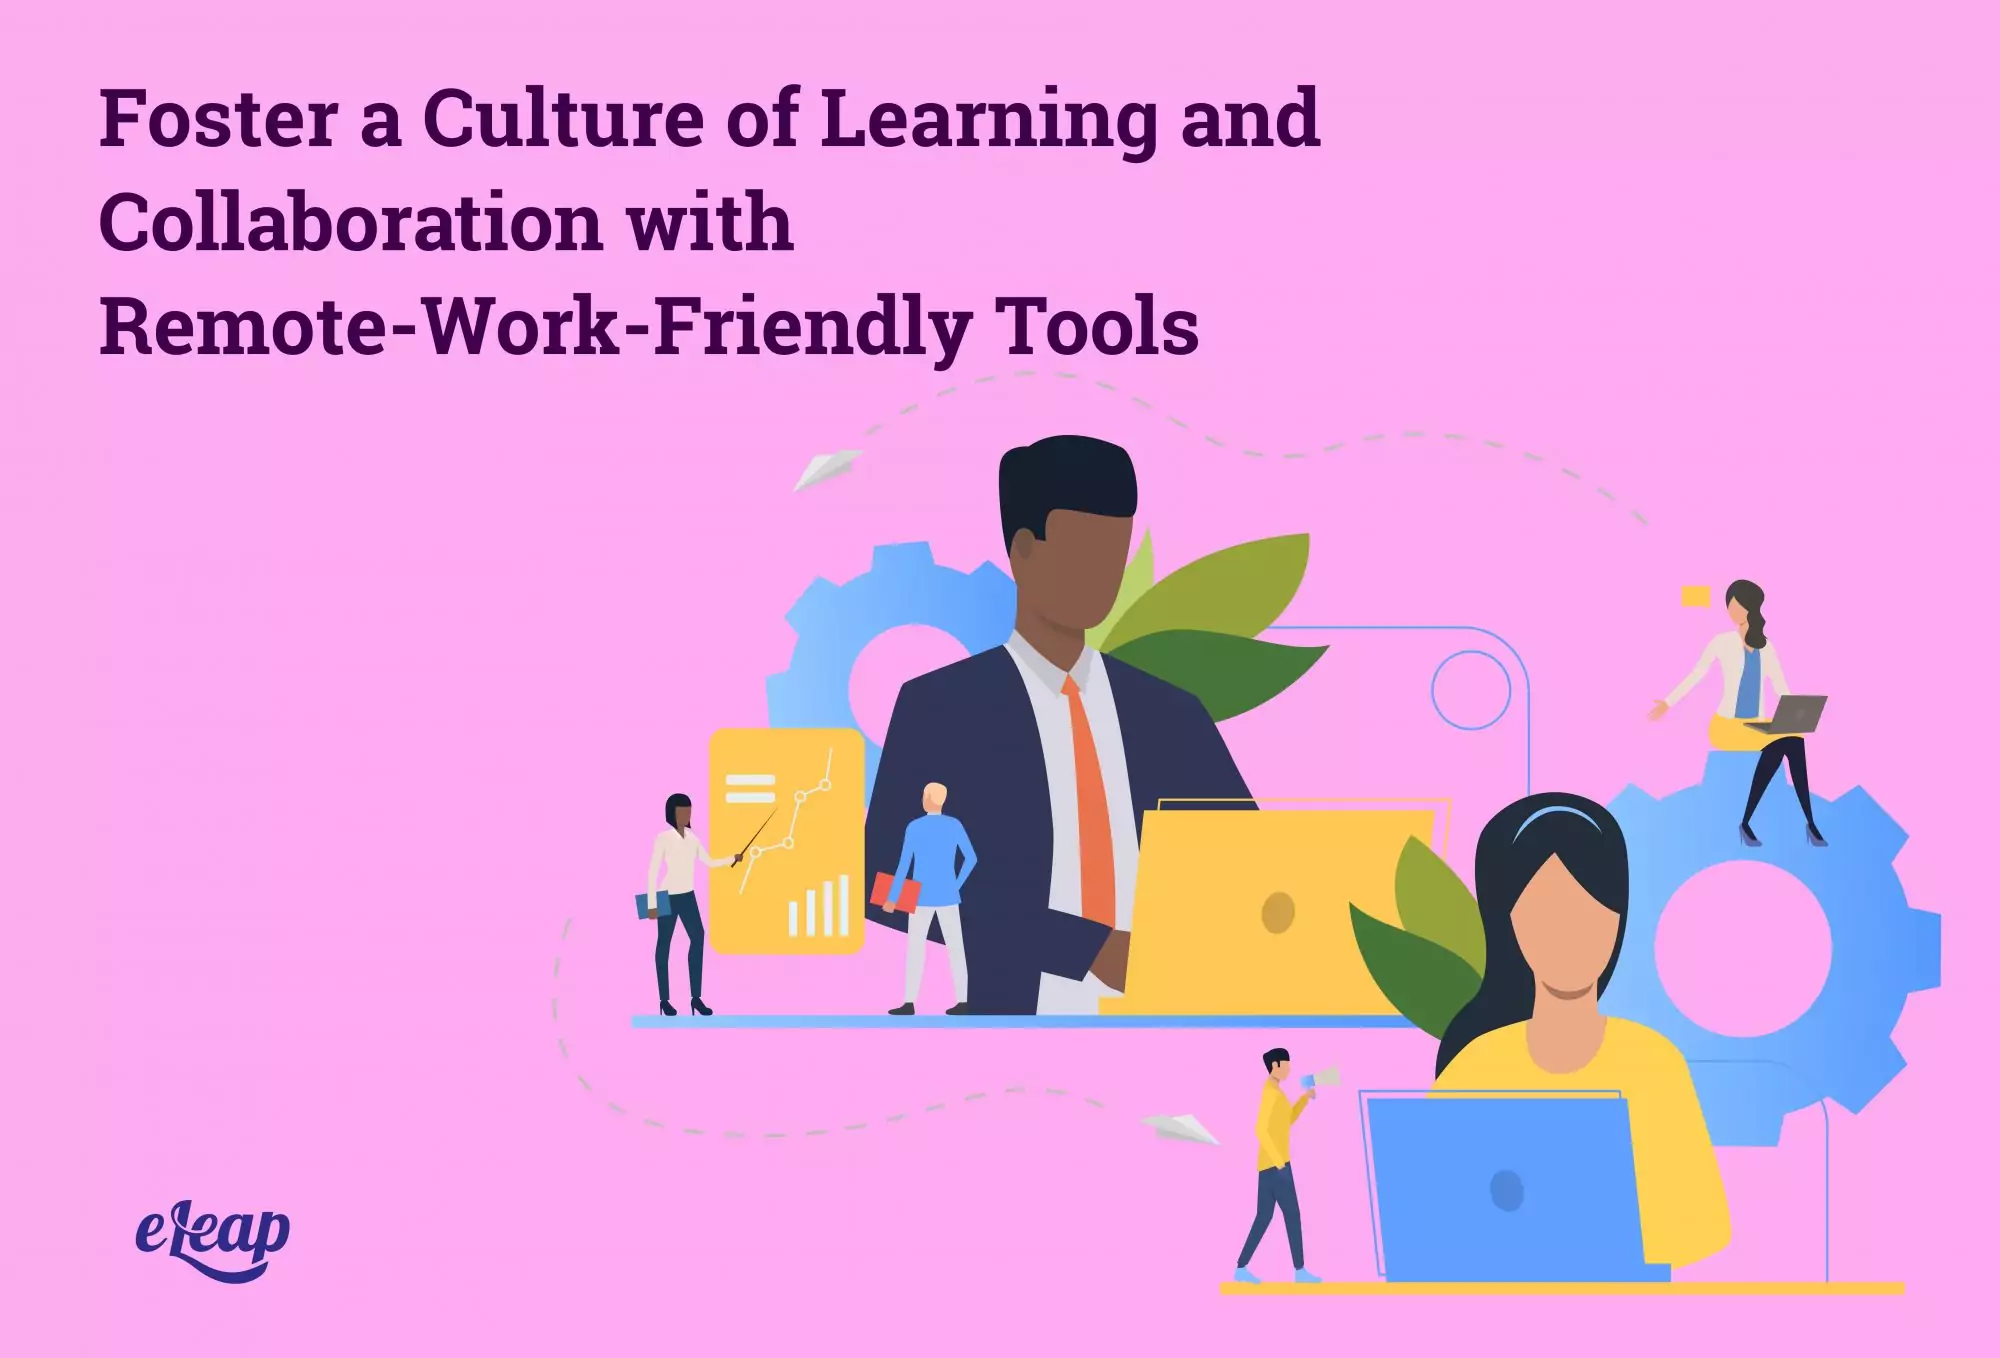 Foster a Culture of Learning and Collaboration with Remote-Work-Friendly Tools